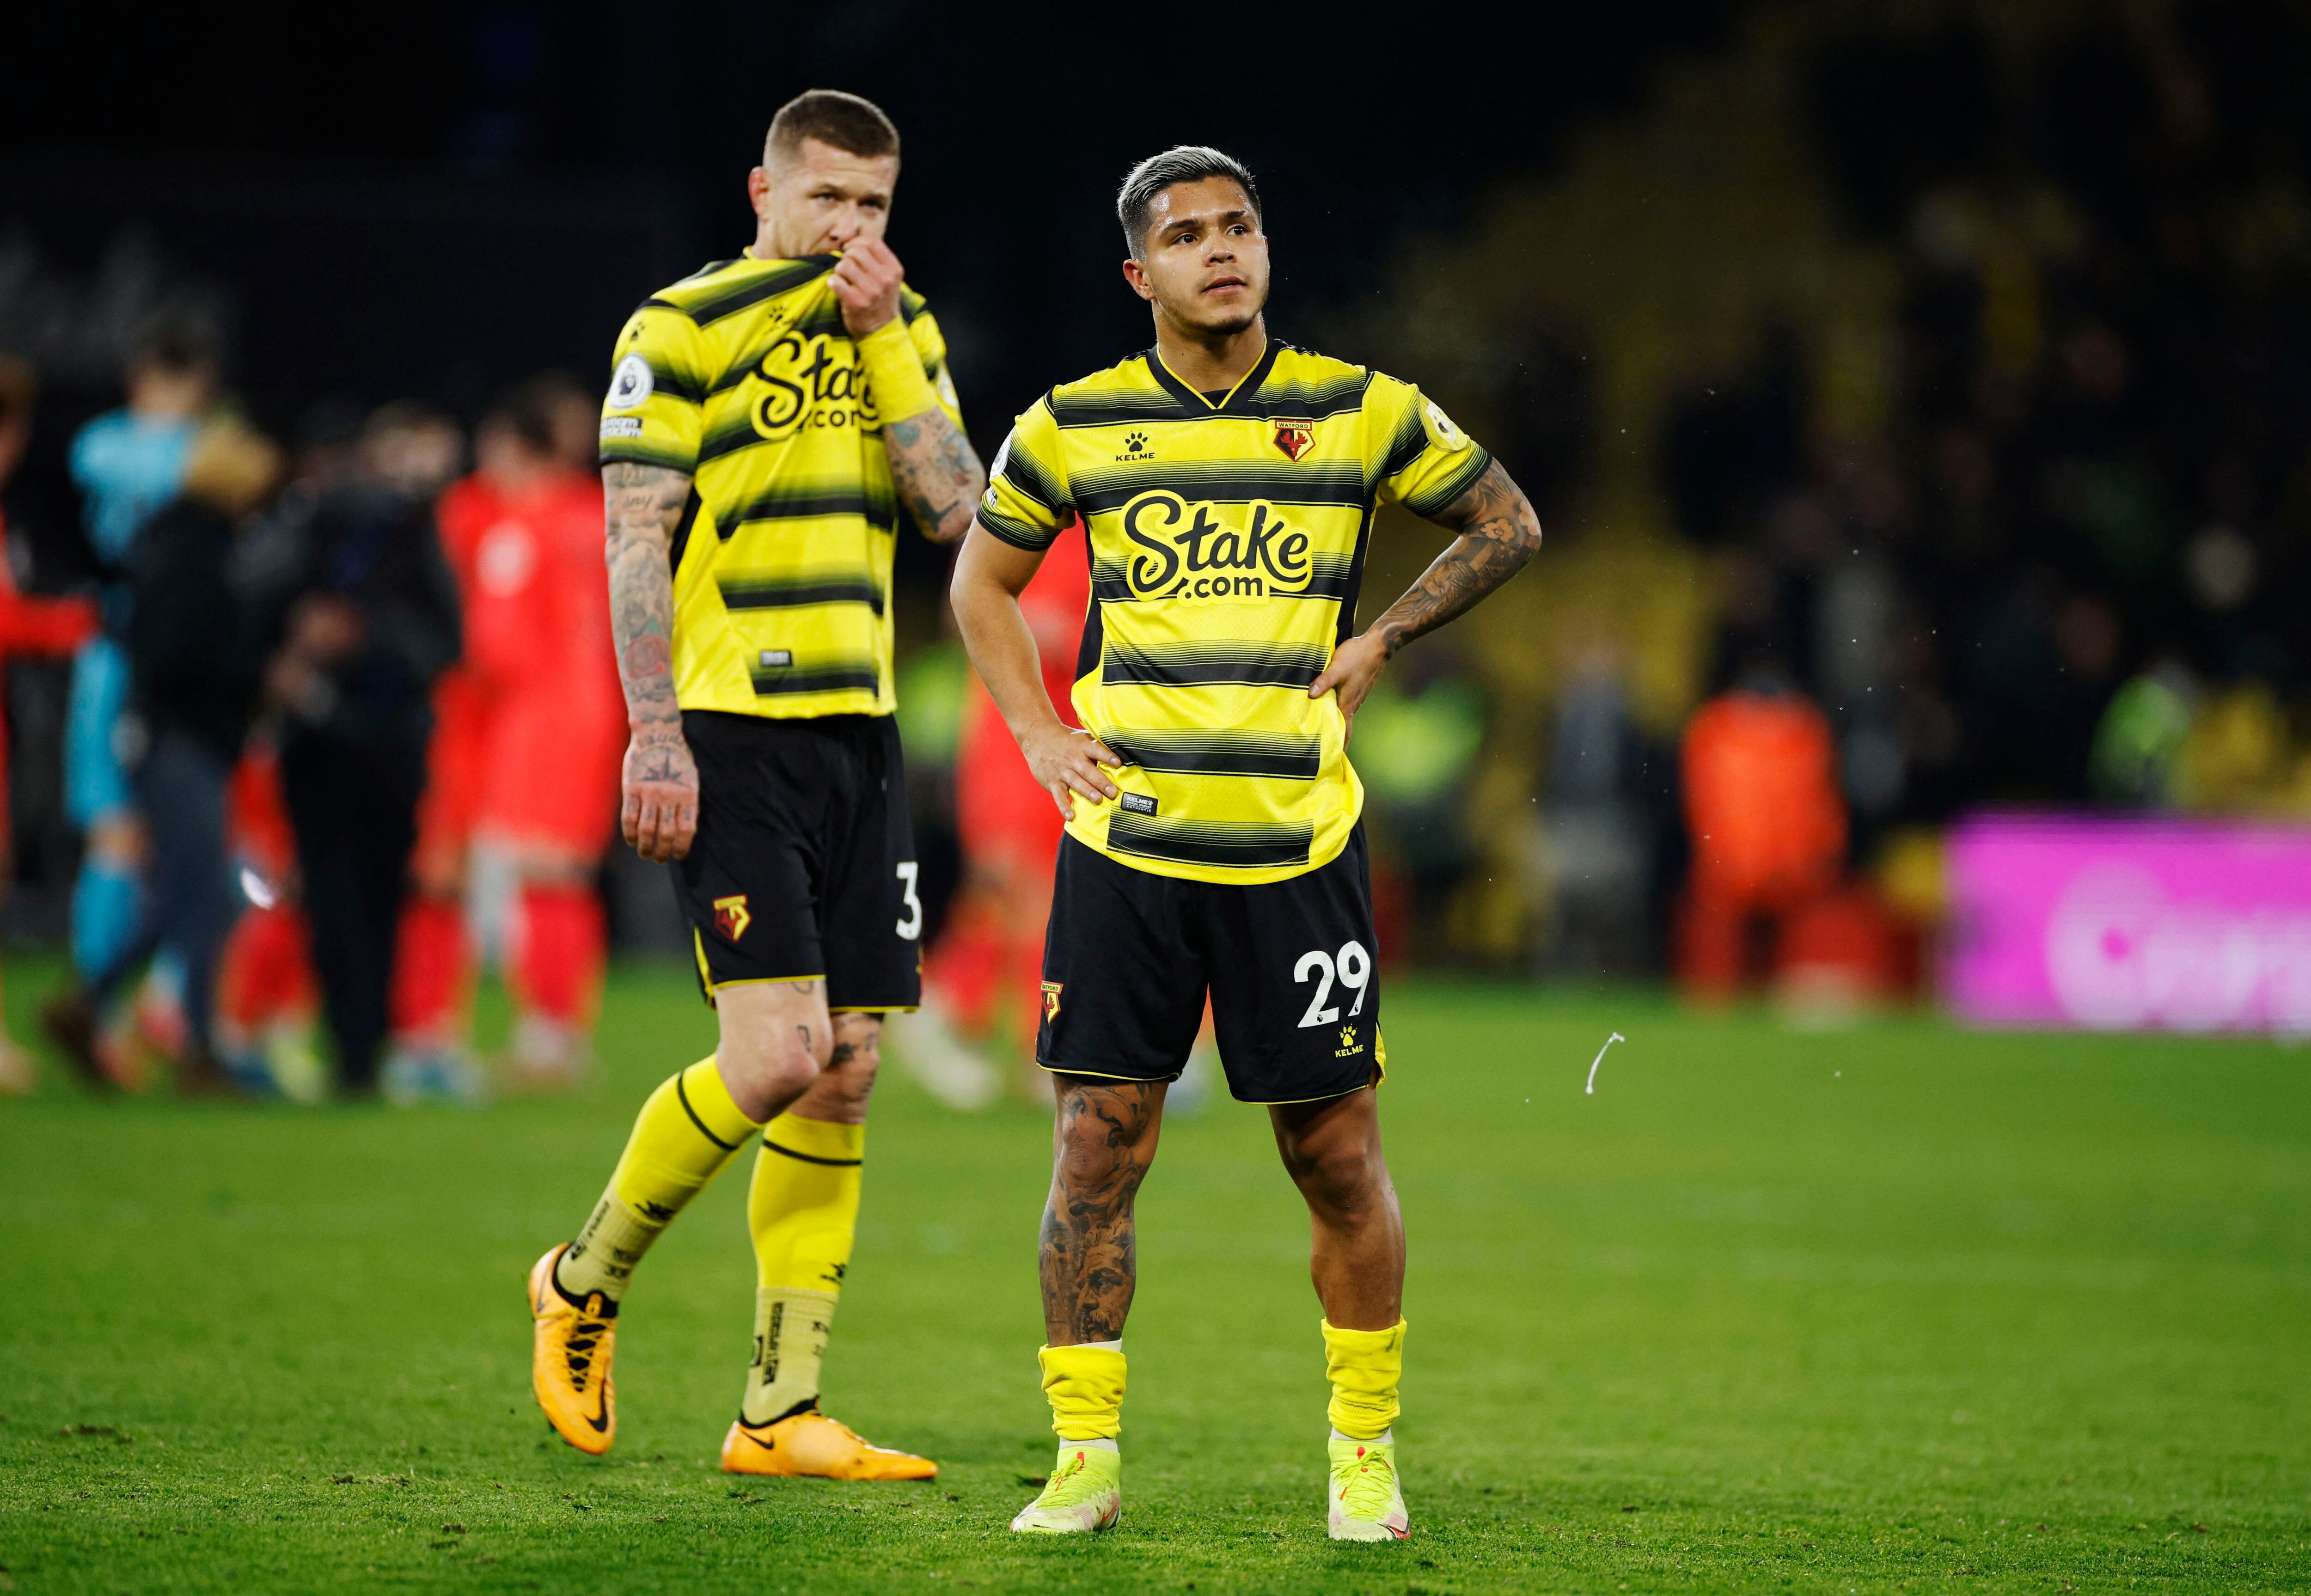 Soccer Football - Premier League - Watford v Norwich City - Vicarage Road, Watford, Britain - January 21, 2022  Watford's Cucho Hernandez and Juraj Kucka look dejected after the match Action Images via Reuters/John Sibley EDITORIAL USE ONLY. No use with unauthorized audio, video, data, fixture lists, club/league logos or 'live' services. Online in-match use limited to 75 images, no video emulation. No use in betting, games or single club /league/player publications.  Please contact your account representative for further details.